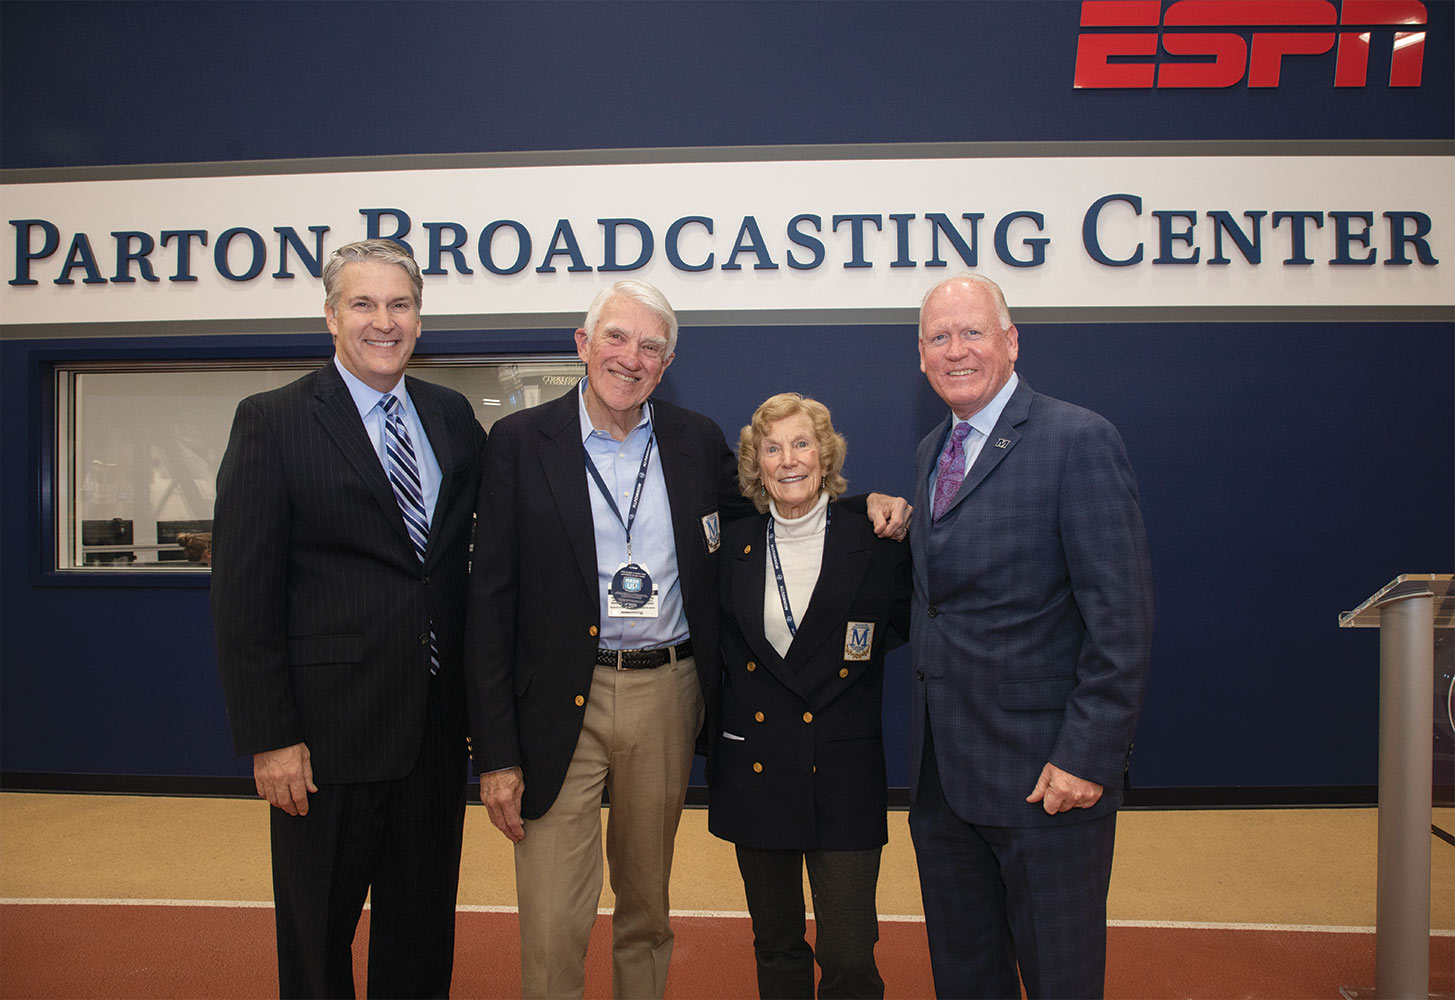 Patrick F. Leahy, Charles and Trudy Parton, Jeff Stapleton standing in front of the ESPN sponsored Parton Broadcasting Center.